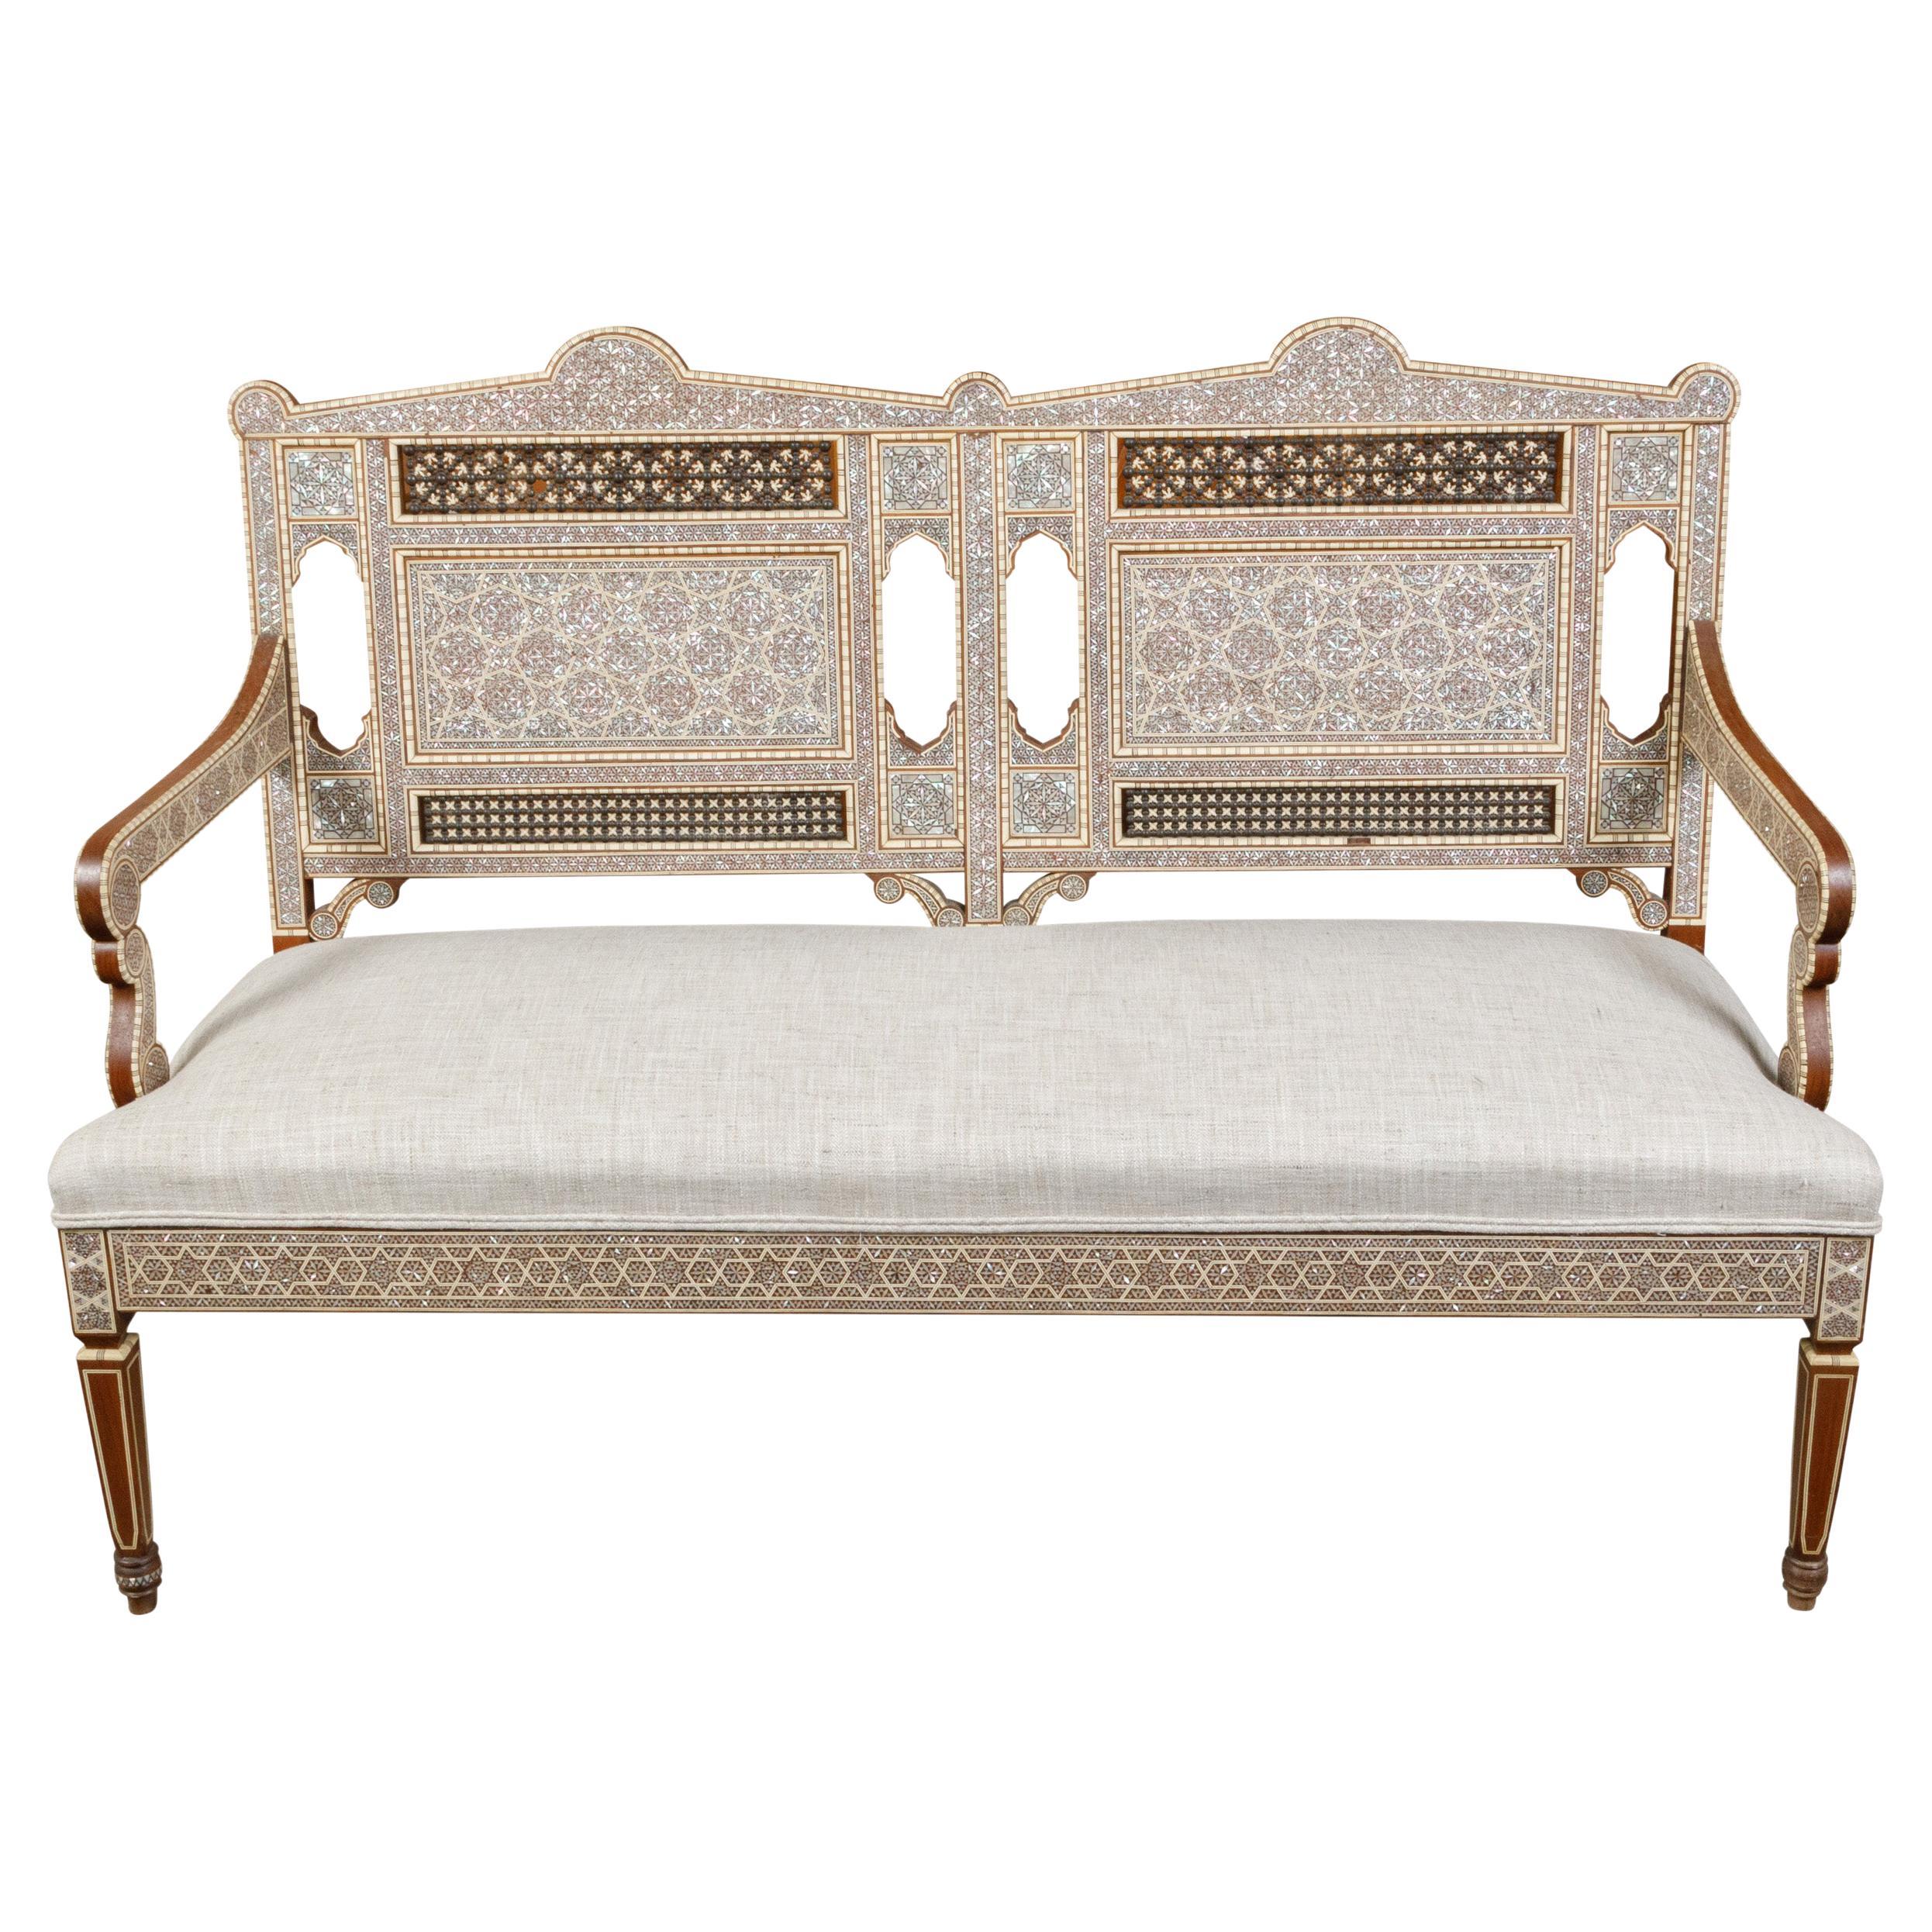 Moroccan Midcentury Settee with Mother-of-Pearl Inlay and New Upholstery